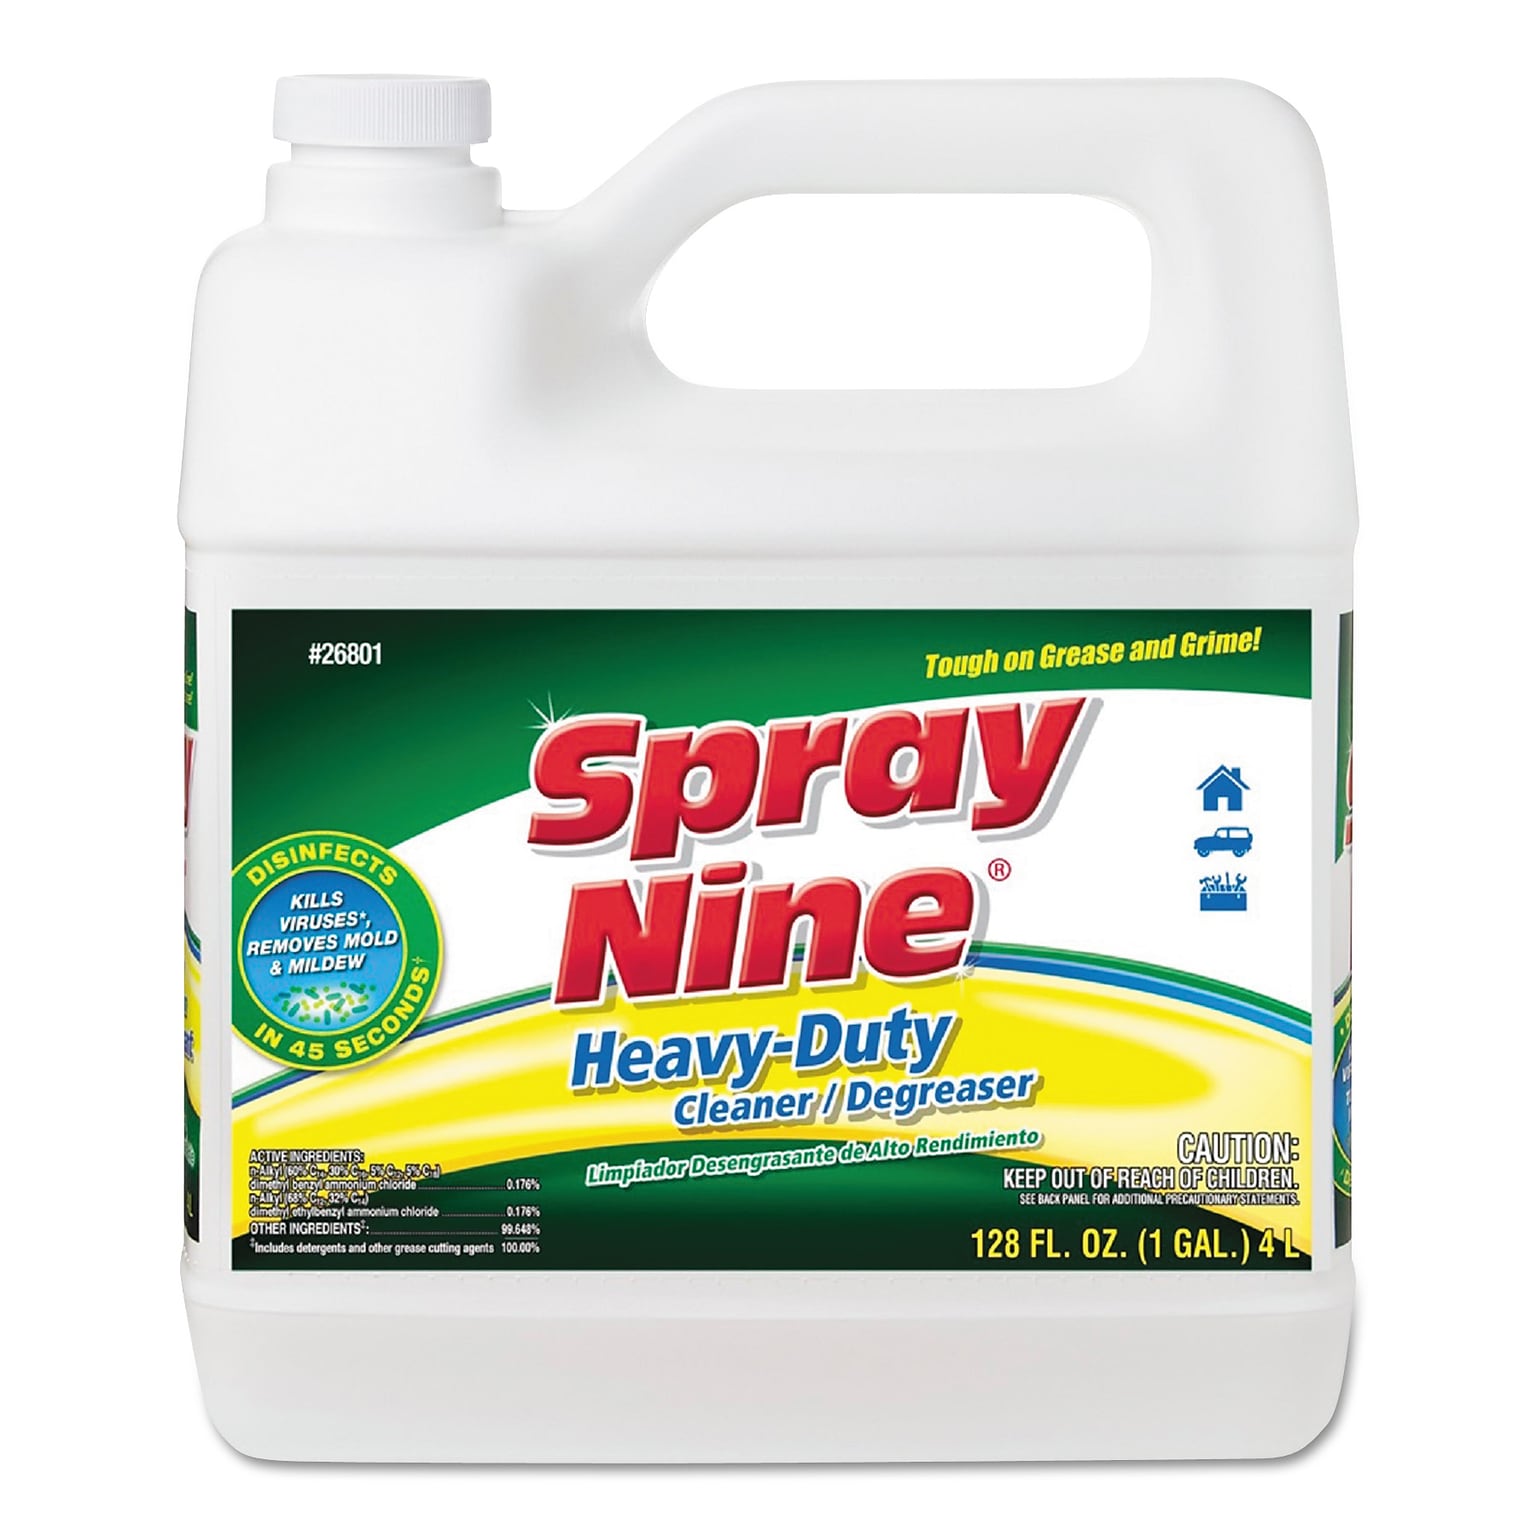 Spray Nine Heavy Duty Cleaner/Degreaser/Disinfectant, Citrus Scent, 1 gal. Bottle (ITW268014)